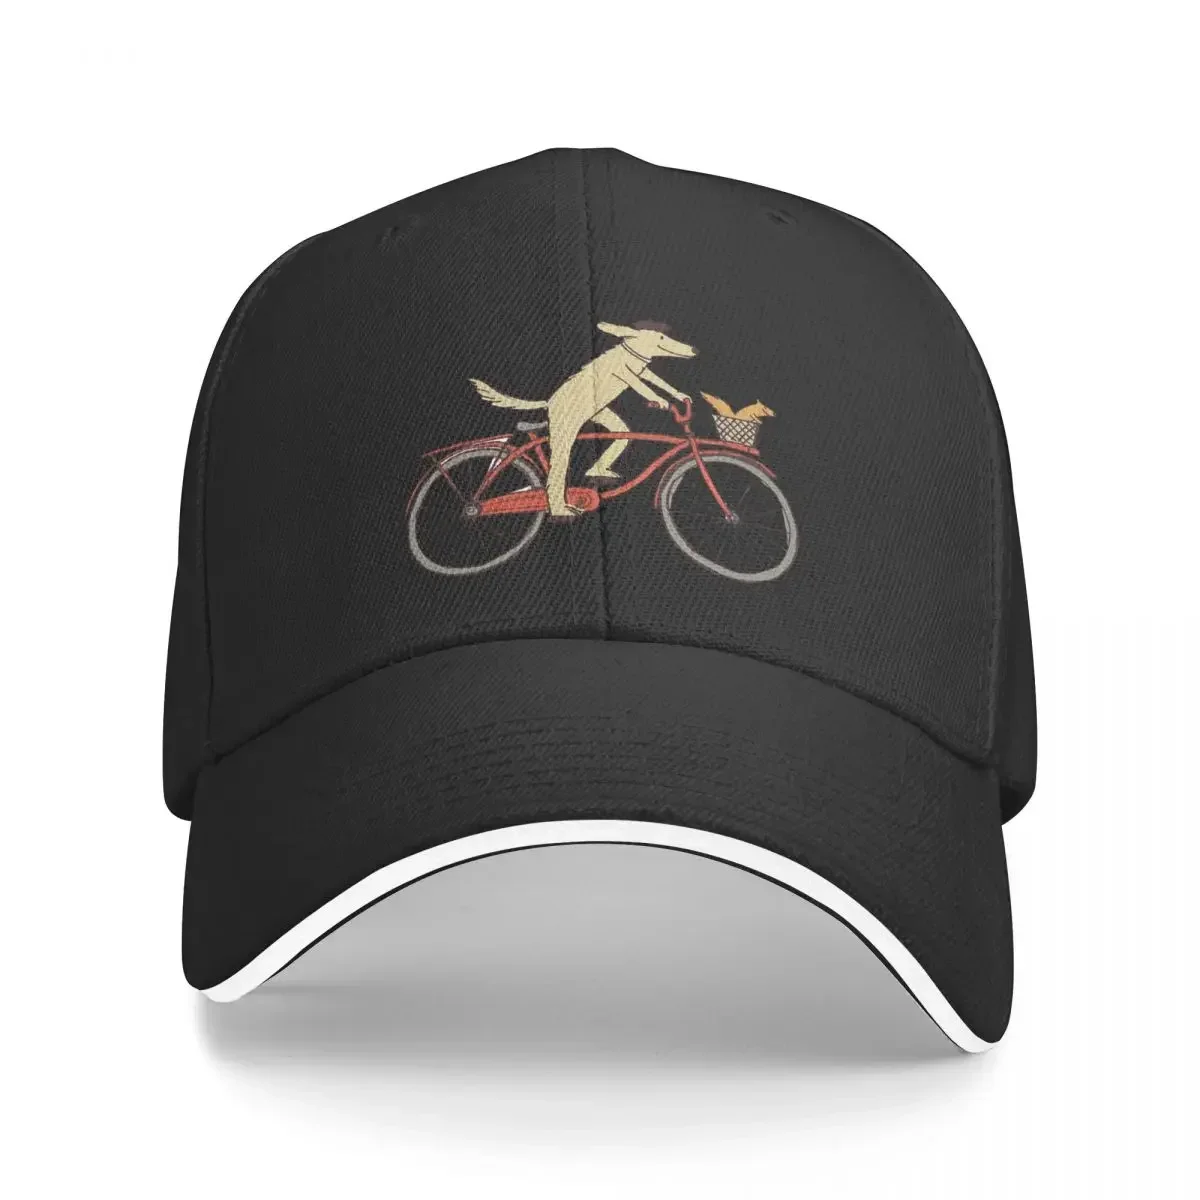 

Art Dog Riding A Bicycle Unisex Caps Outdoor Trucker Baseball Cap Snapback Breathable Hat Customizable Polychromatic Hats